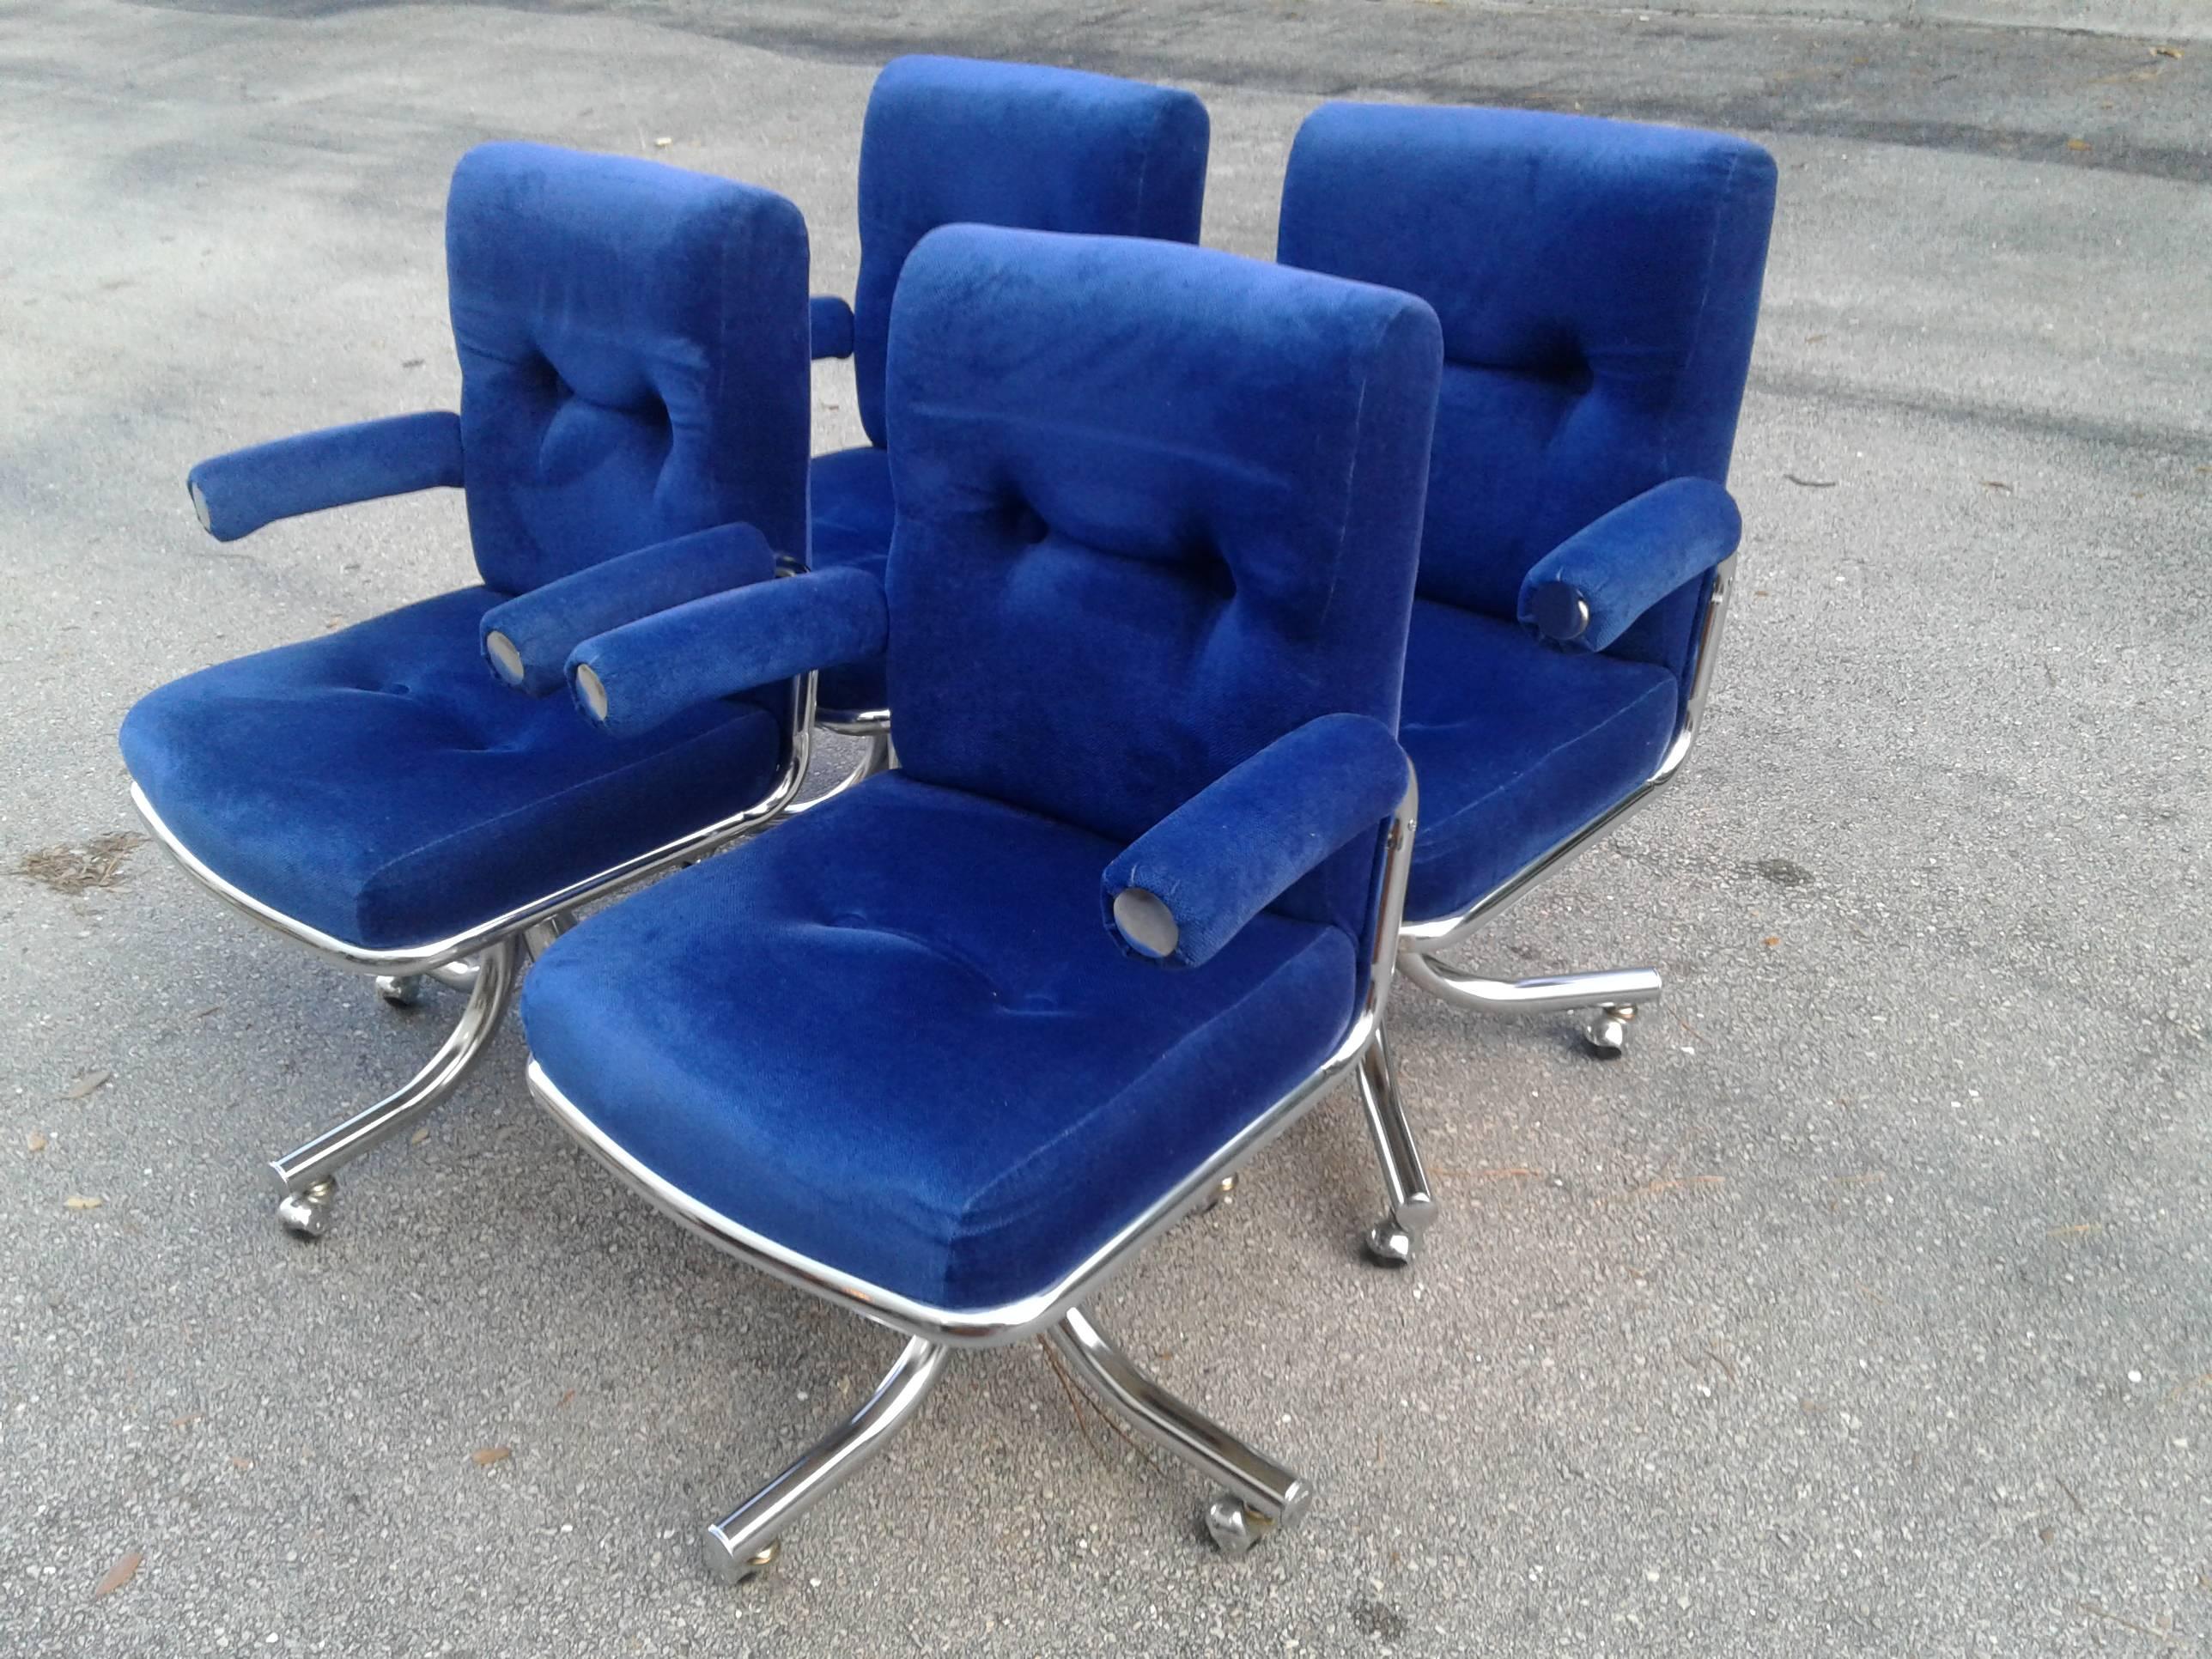 American Chrome Swivel Arm Chairs Vintage Blue Desk Dining Hollywood Regency Individually